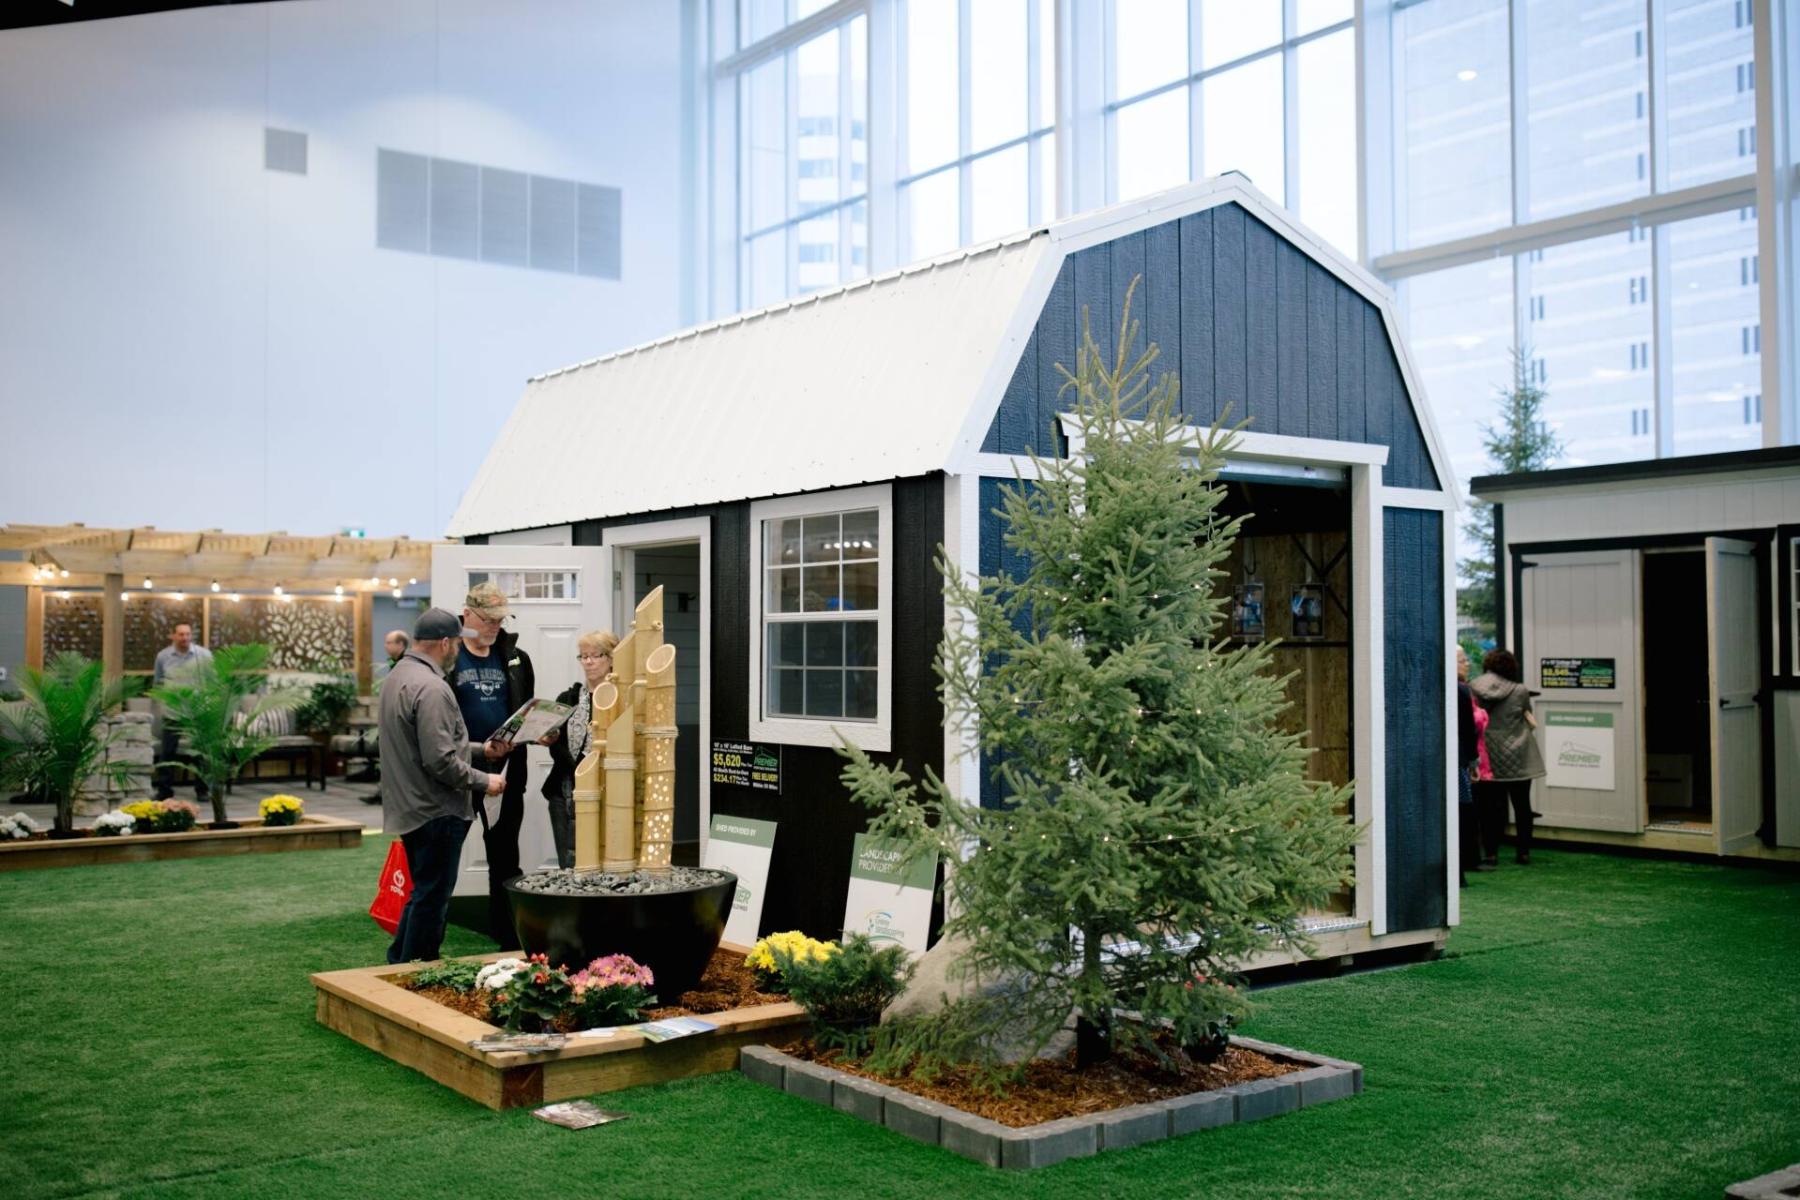  <p>MHBA</p>
                                <p>The Winnipeg Home and Garden Show is on until Sunday at the RBC Convention Centre.</p> 